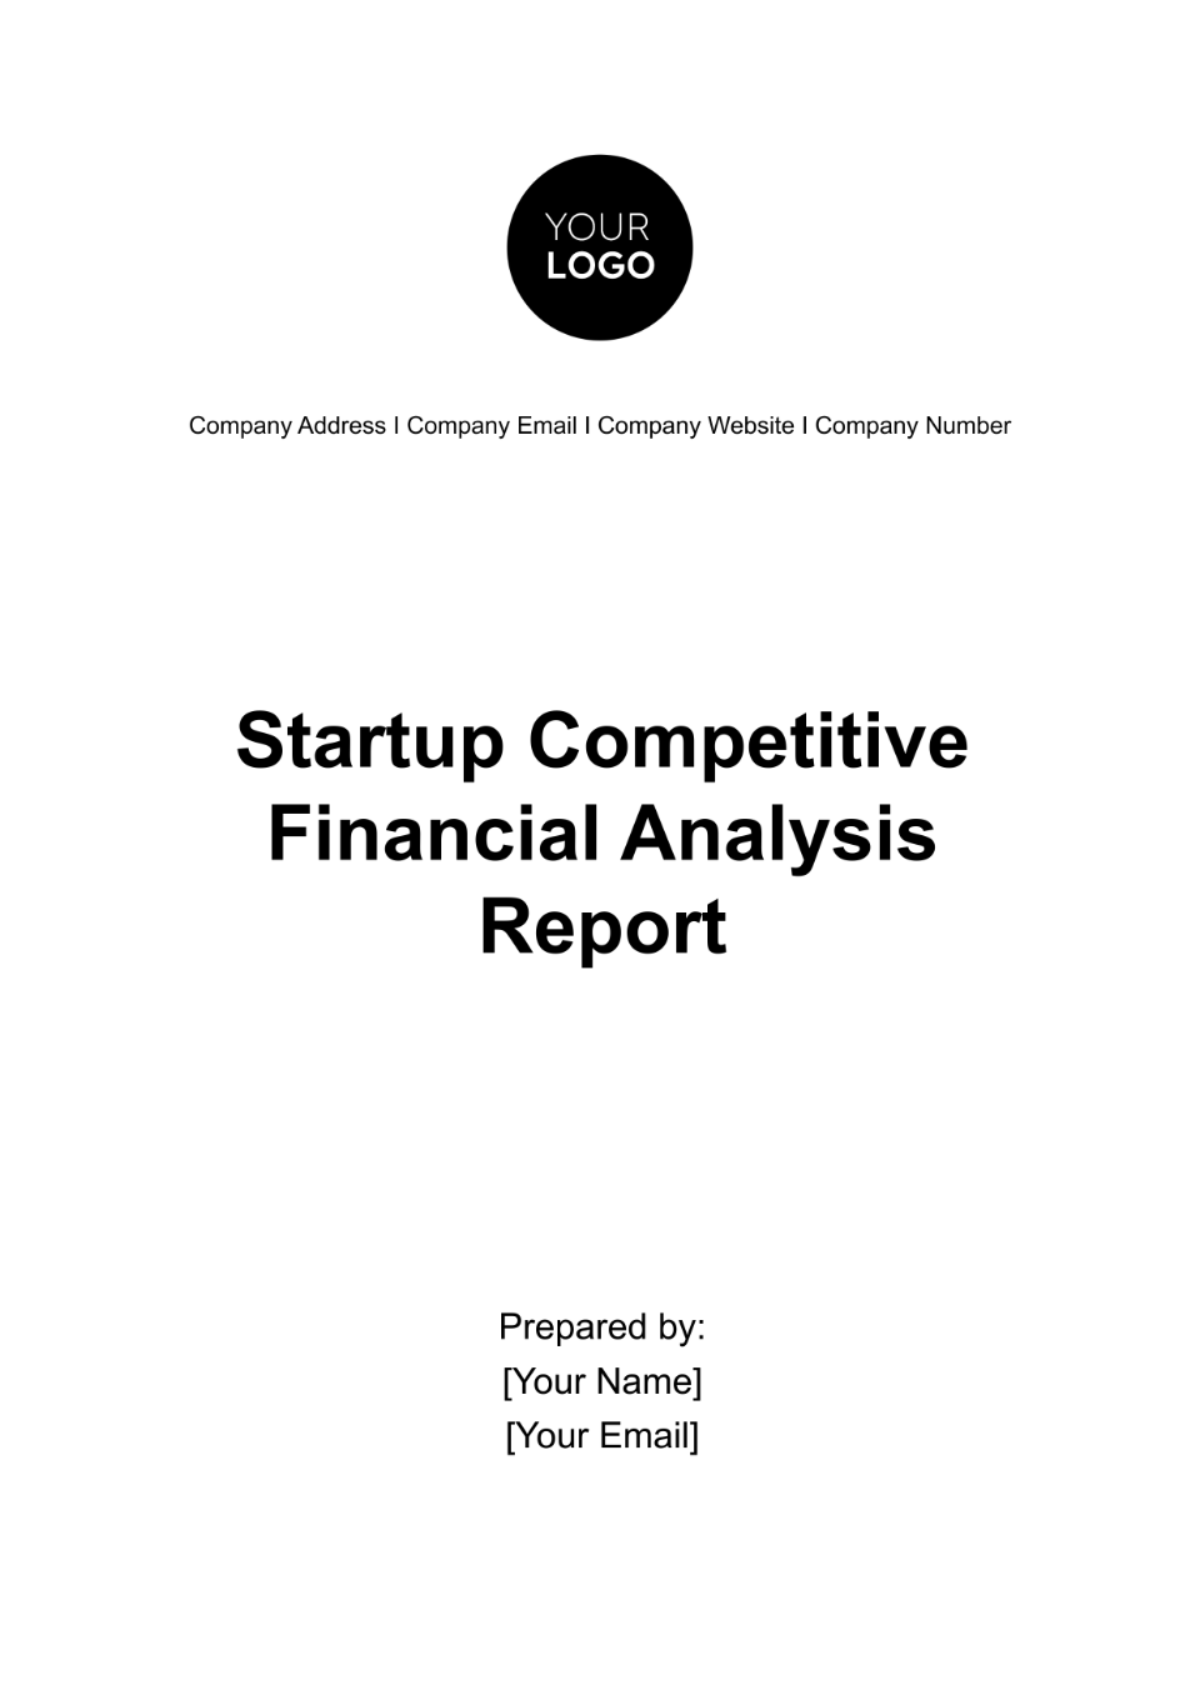 Startup Competitive Financial Analysis Report Template